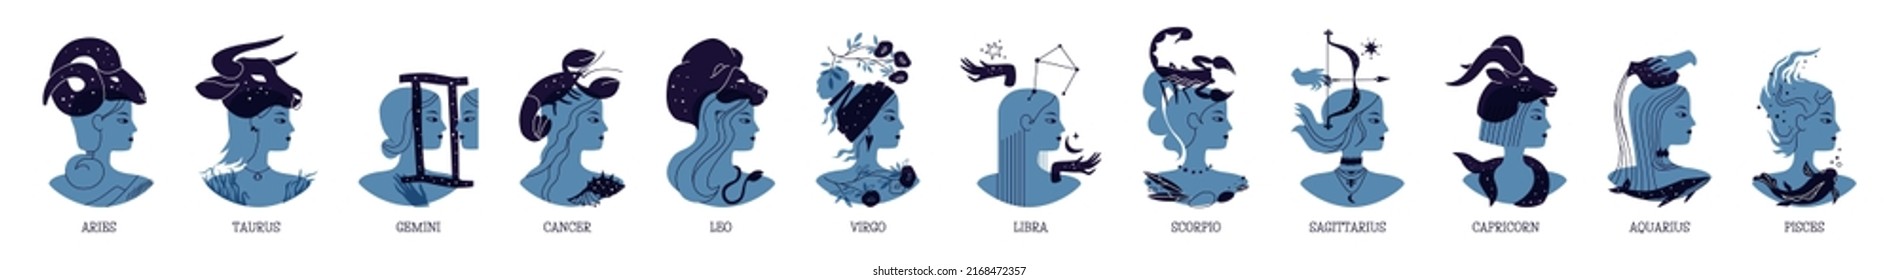 Collection twelve zodiac signs  Blue female silhouettes in profile and zodiac symbols   animals  Astrology elements vector illustration isolated white background 